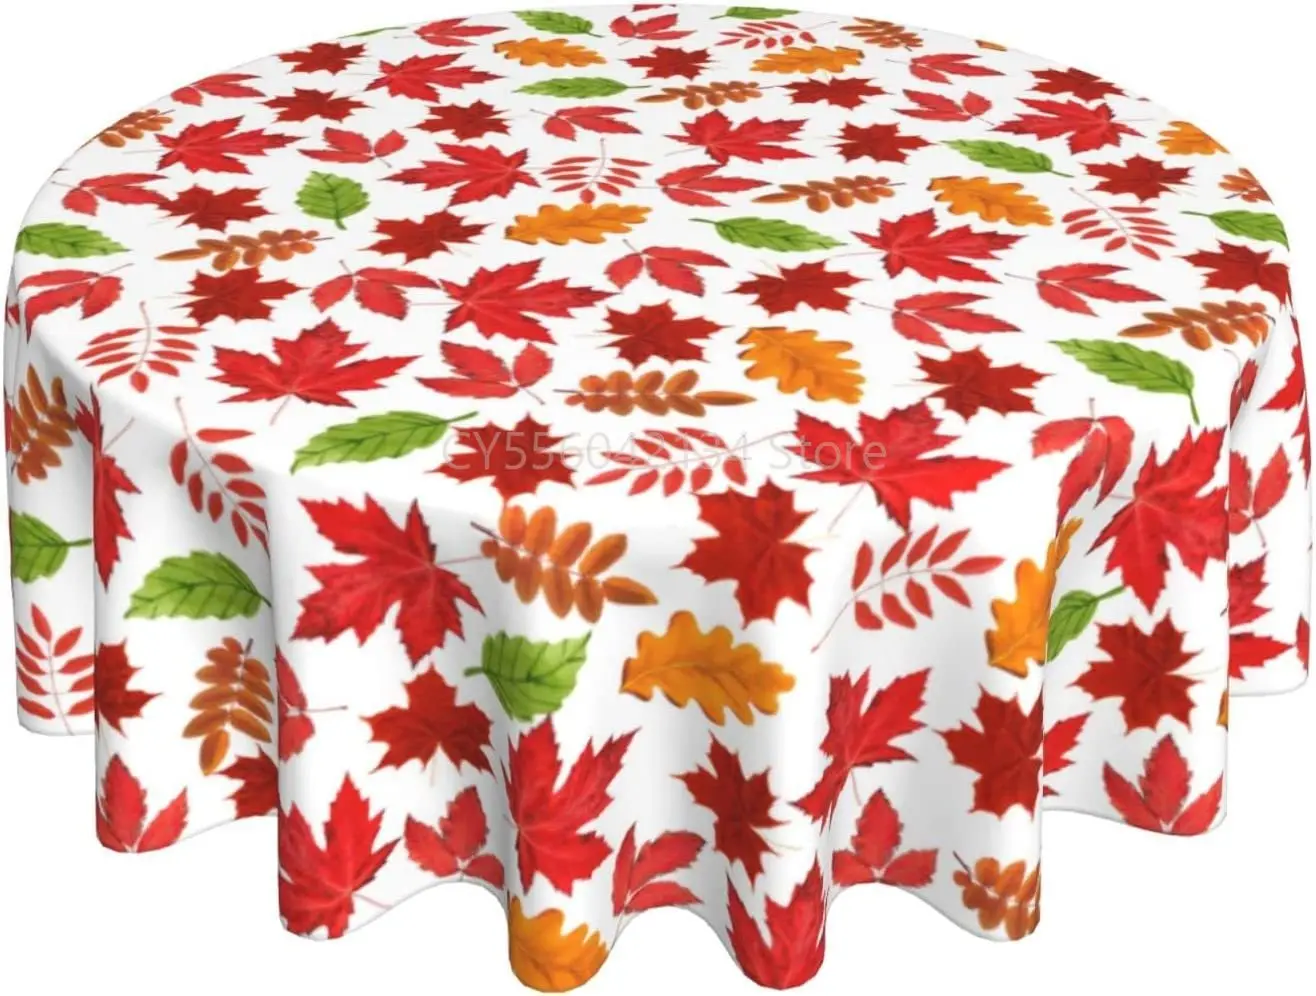 

Maple Leaf Fall Tablecloth 60 Inch Round Autumn Thanksgiving Fabric Table Cloth Fall Leaves Table Cover Waterproof Tablecloths